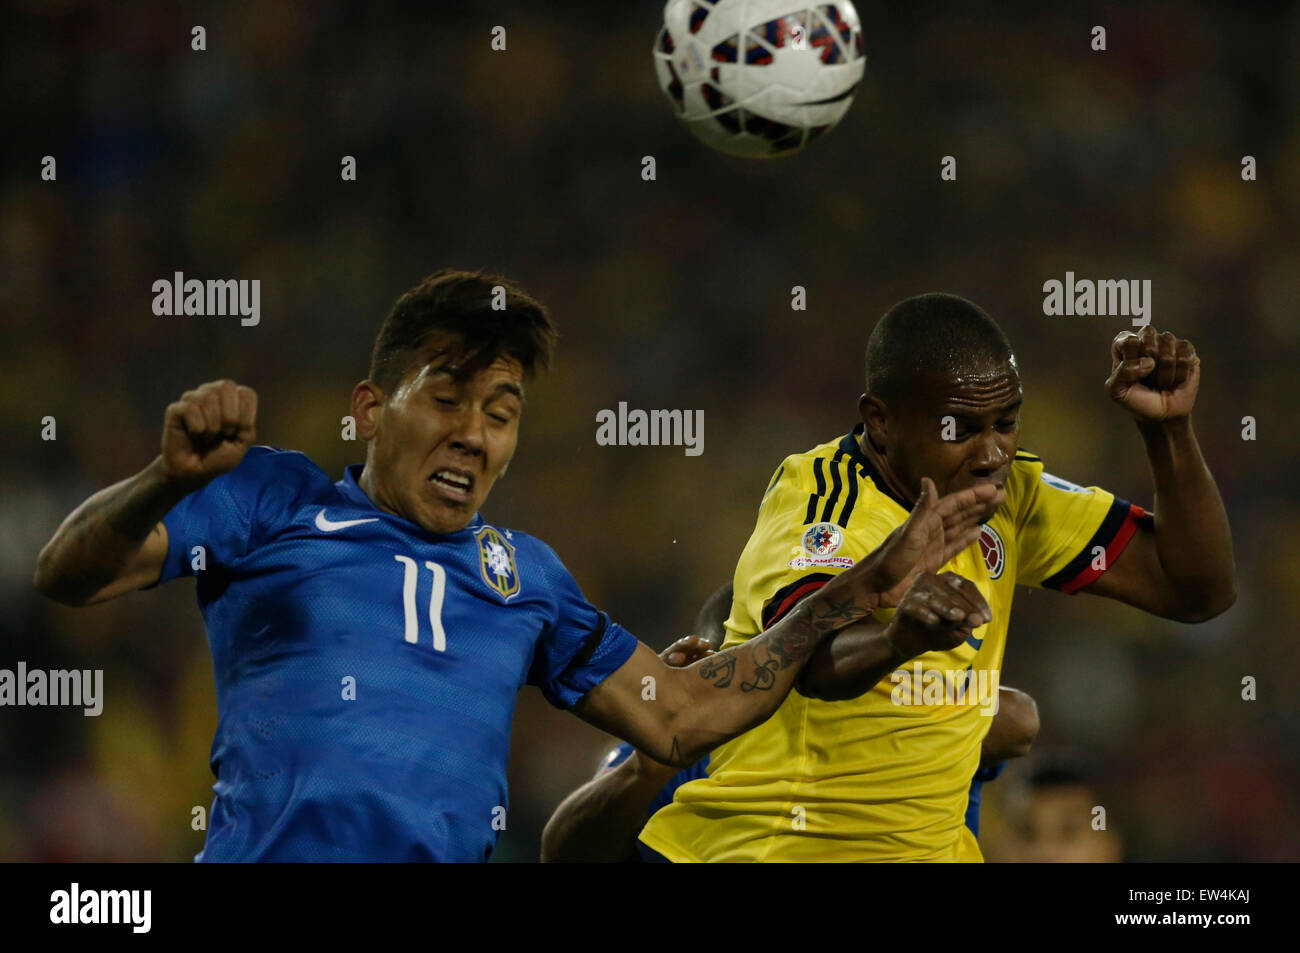 Santiago, Chile. 17th June, 2015. Roberto Firmino (L) of Brazil vies for the ball with Cristian Zapata of Colombia during the Group C match of the Copa America Chile 2015, at the Estadio Monumental, in Santiago, Chile, on June 17, 2015. Credit:  Guillermo Arias/Xinhua/Alamy Live News Stock Photo